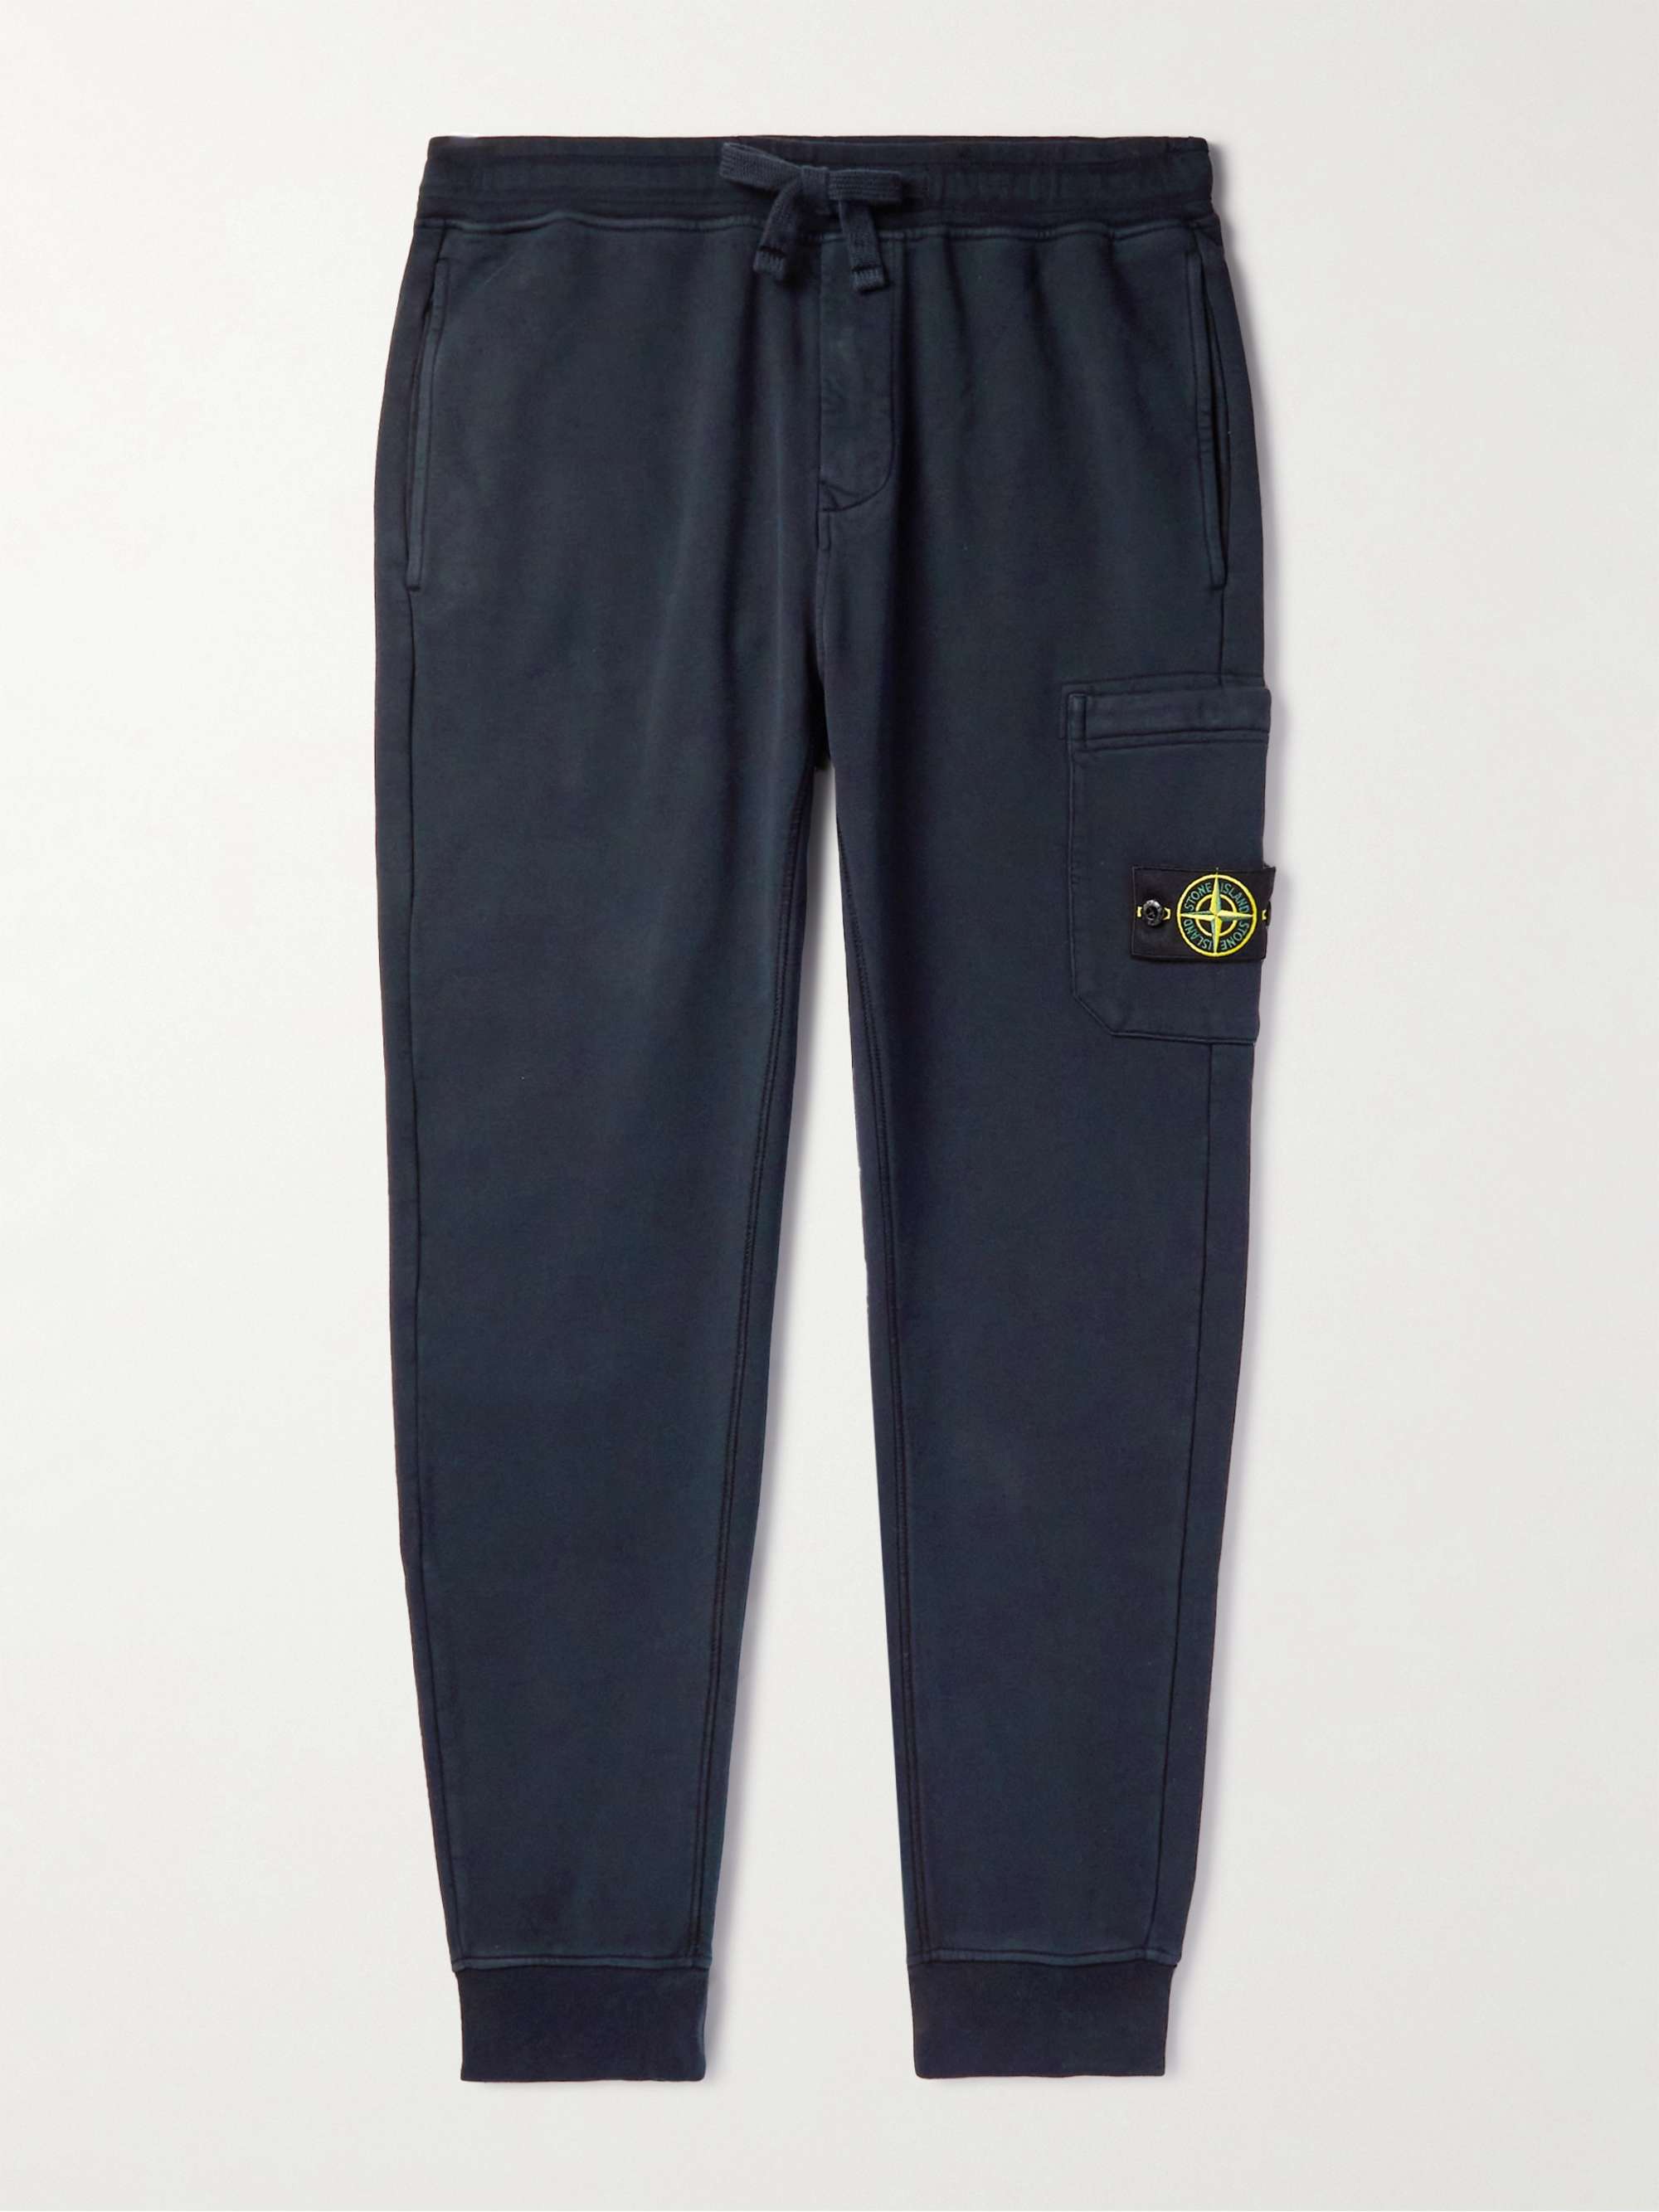 STONE ISLAND Tapered Logo-Appliqued Garment-Dyed Cotton-Jersey Sweatpants,Navy